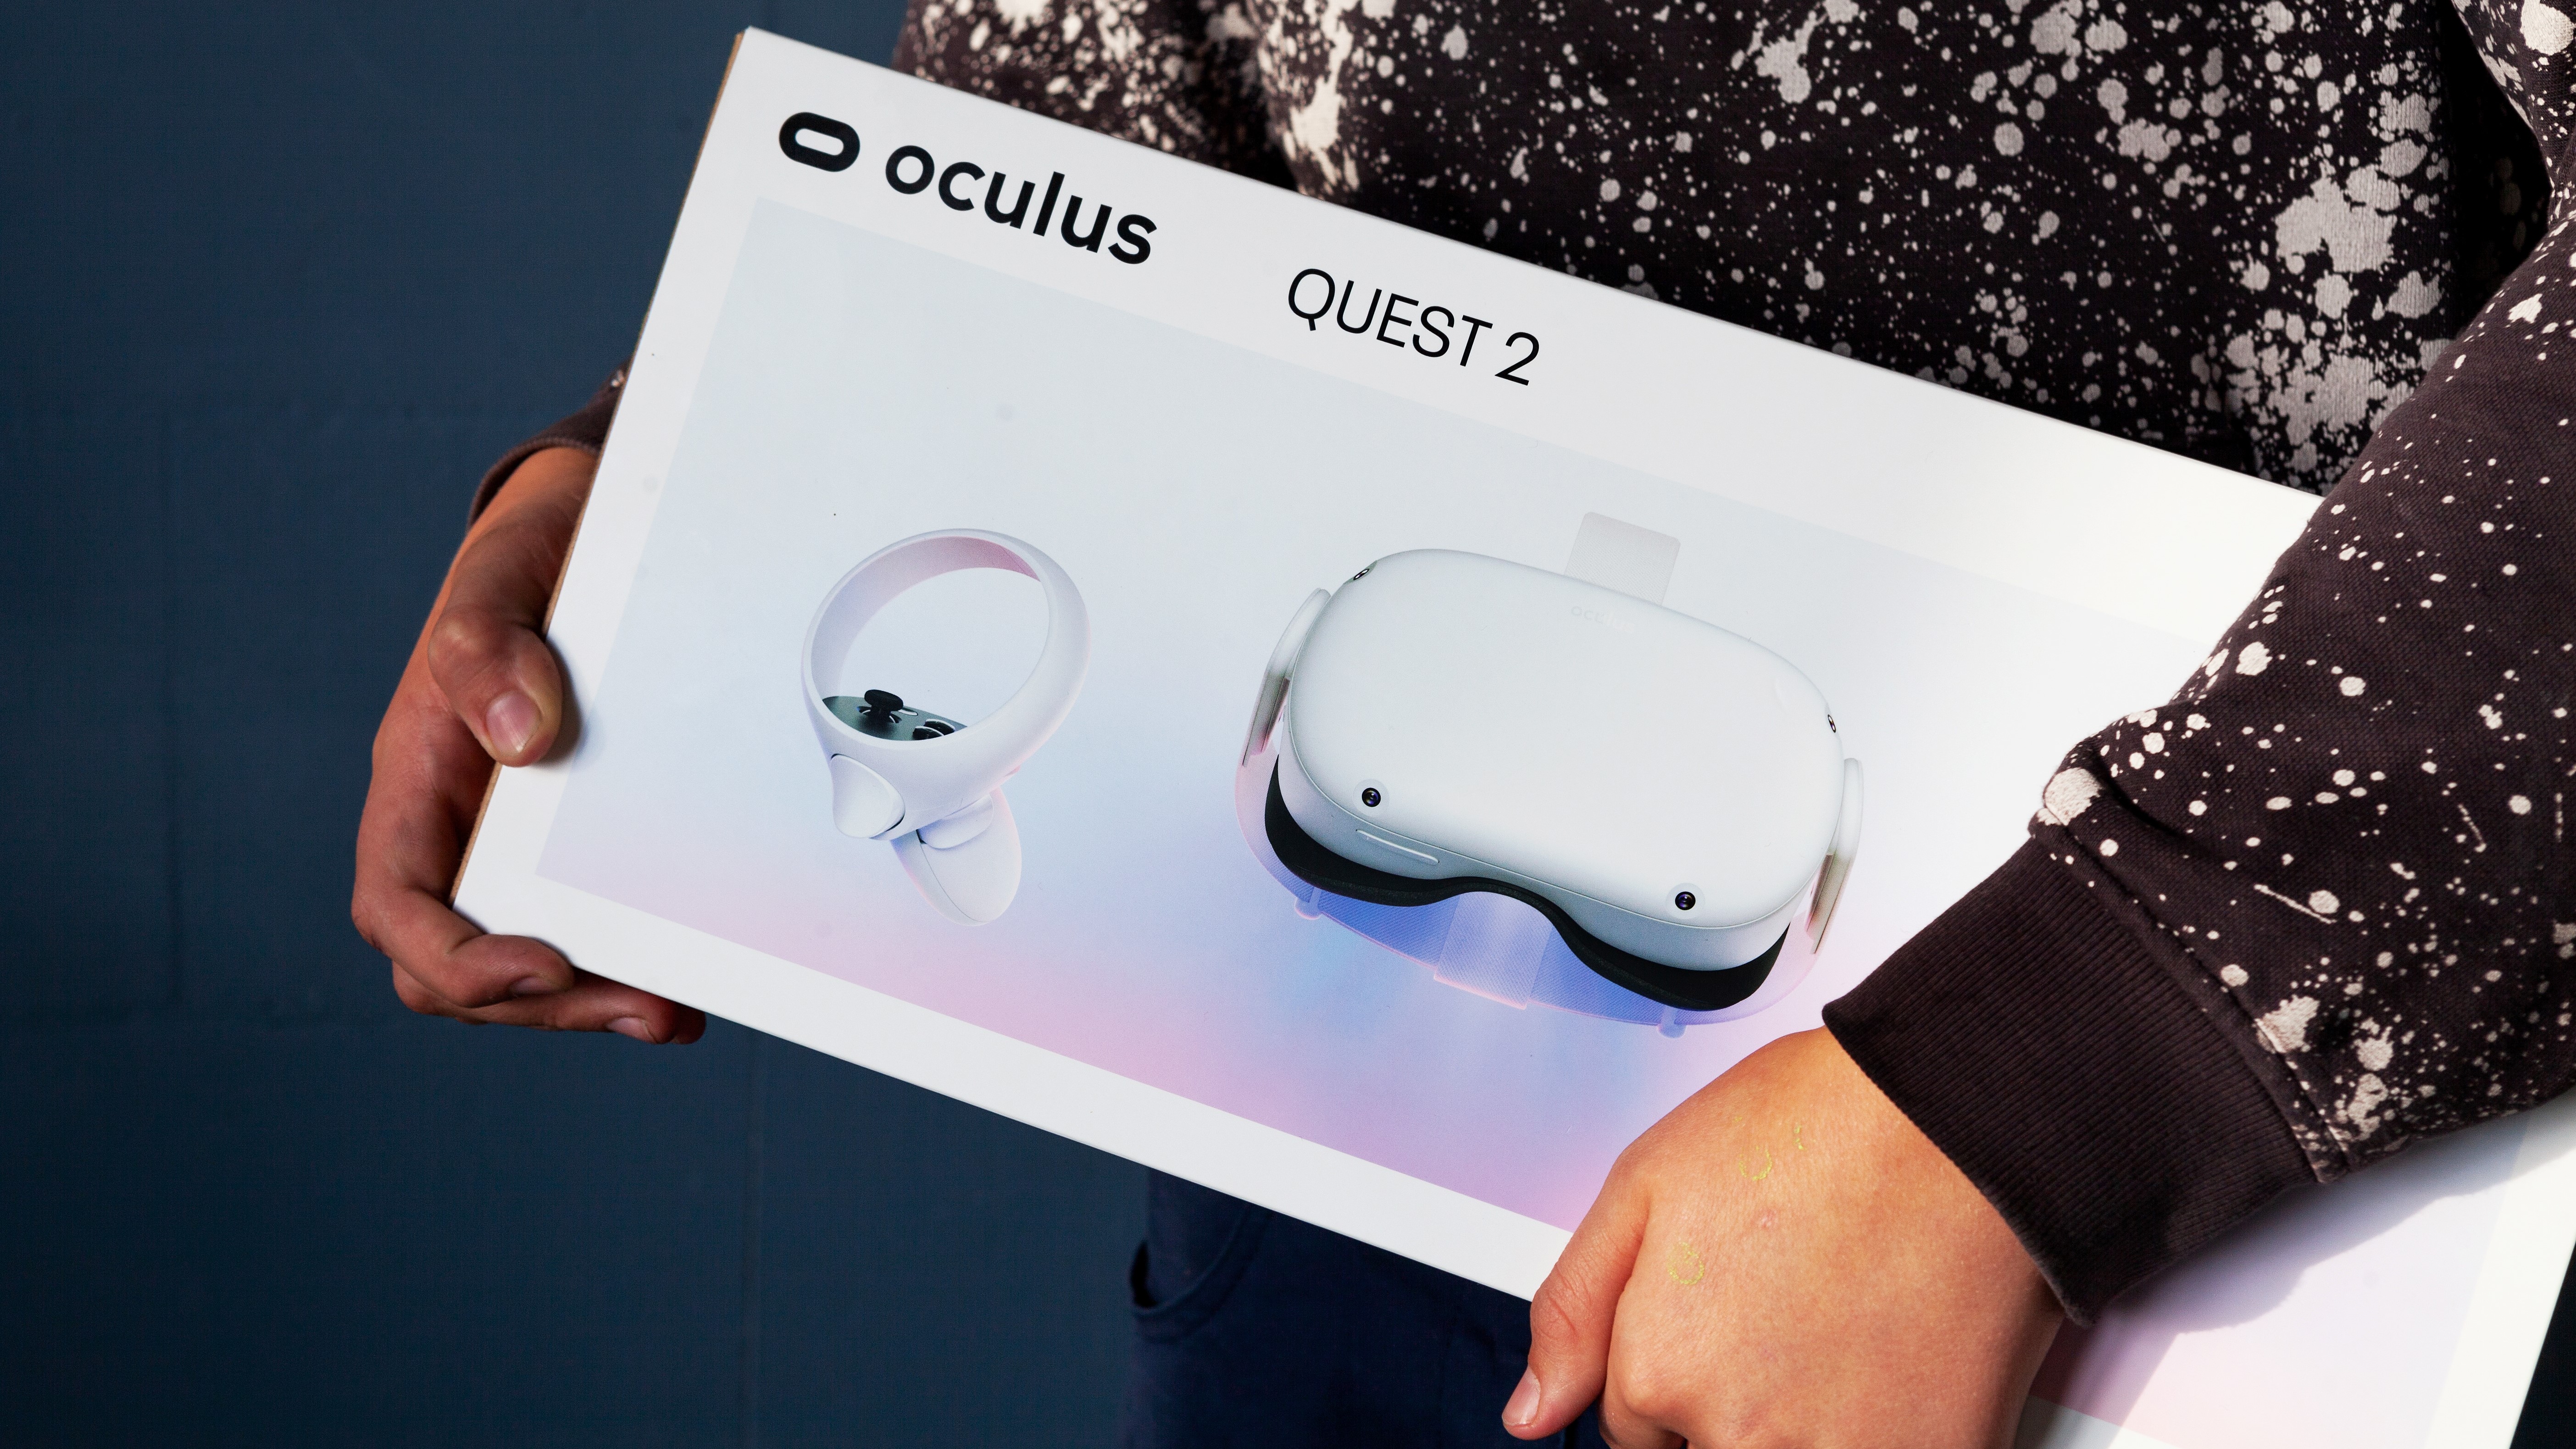 Oculus Quest 2 is getting a major price hike so it's time to bring